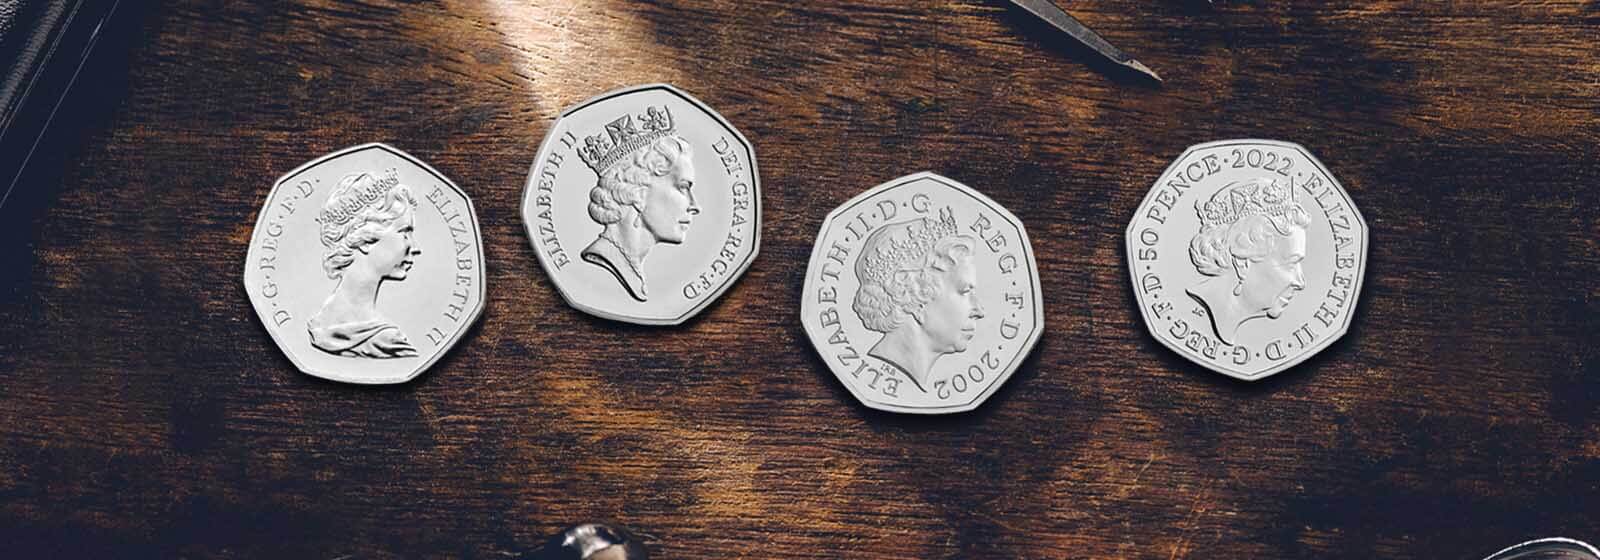 The Story of the 50p Coin